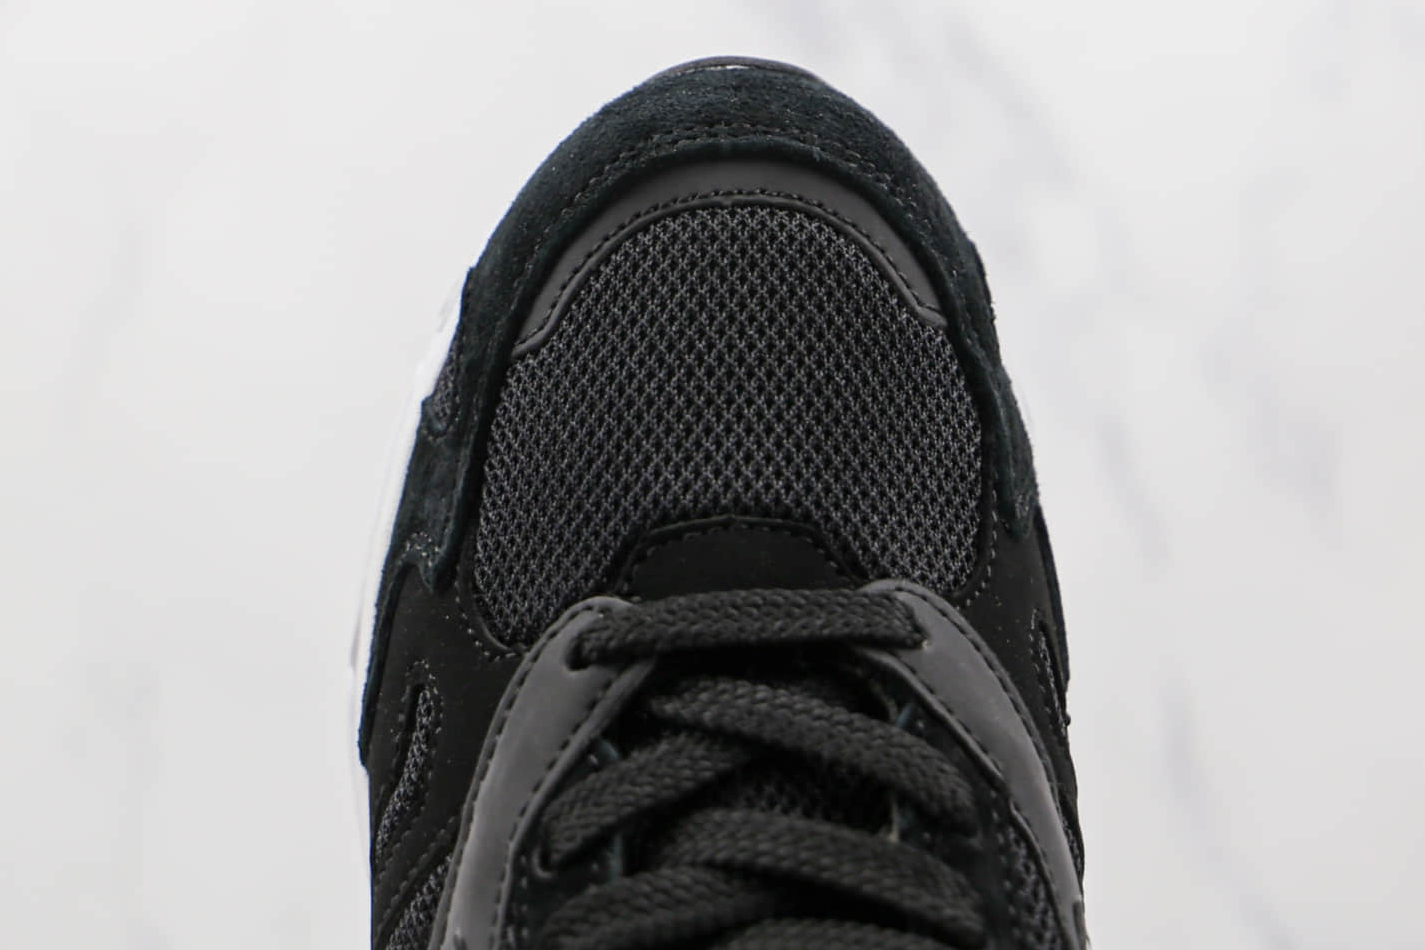 New Balance 920 Black M920KR - Sleek Style and Comfort for Any Occasion